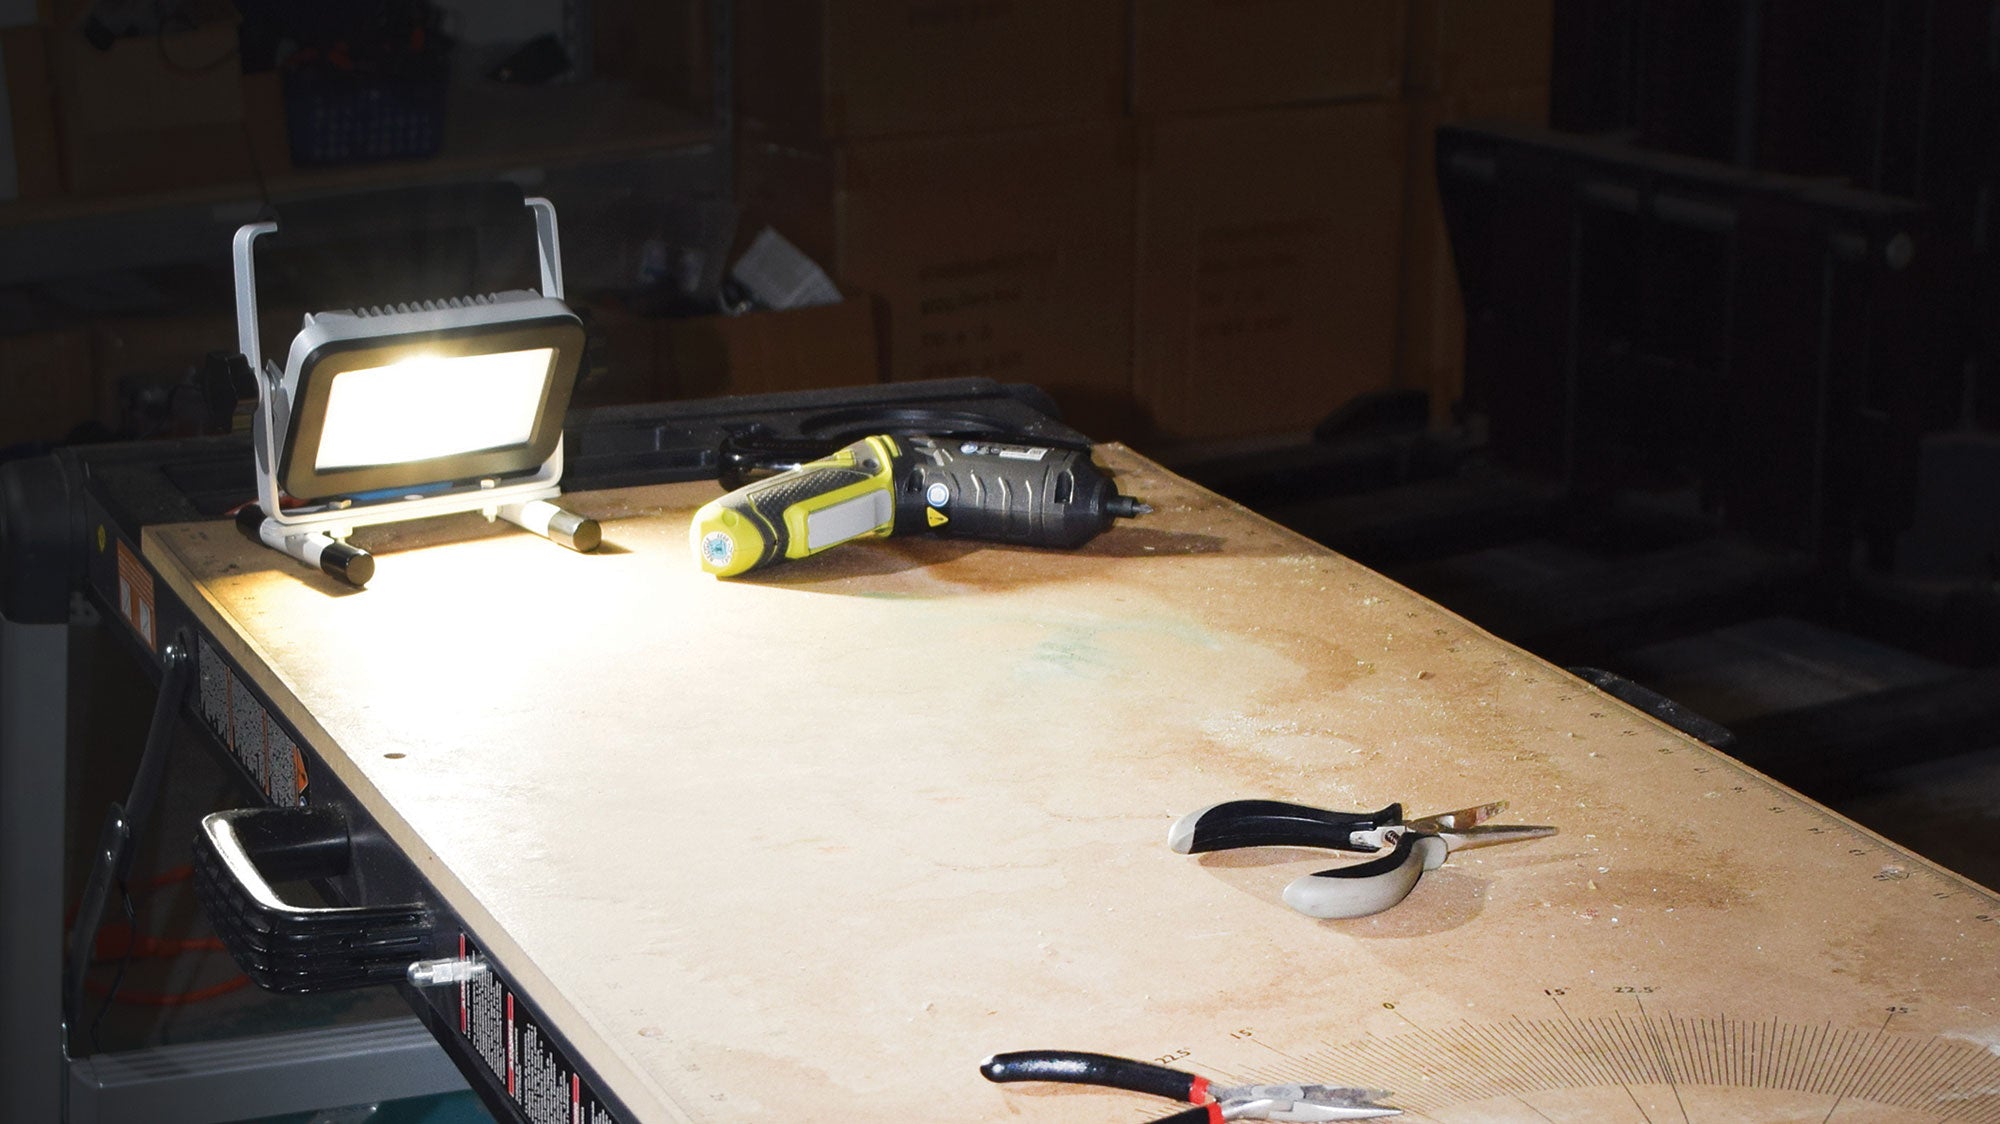 Easy-to-Carry Work Lights for Any Worksite